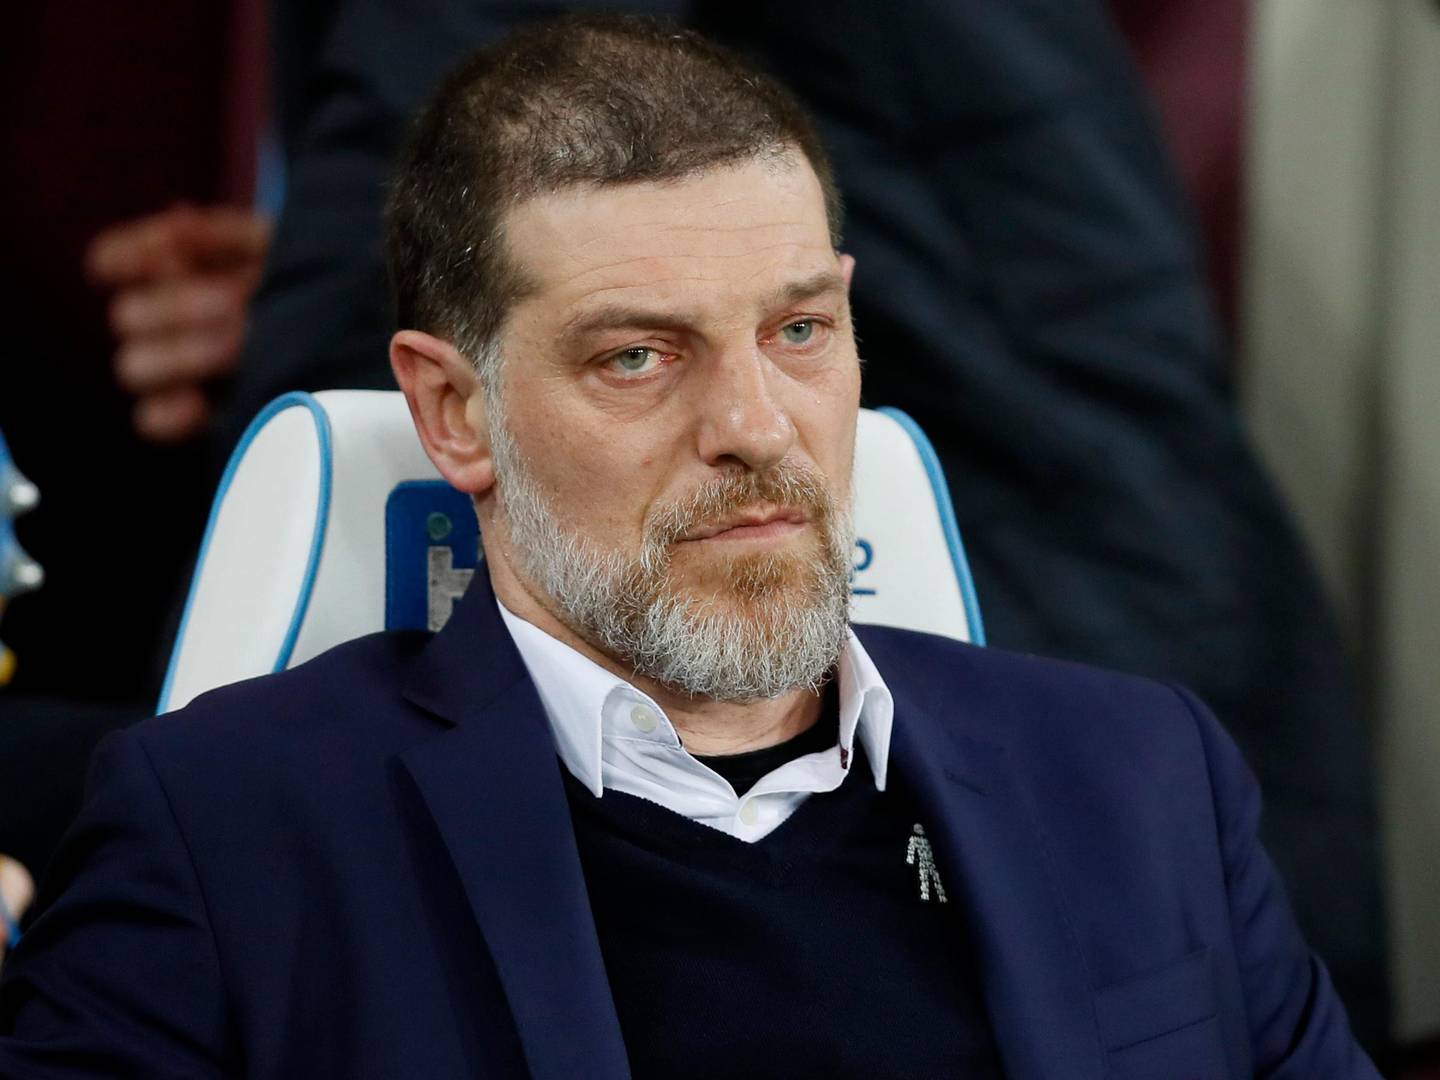 FILE - In this Monday, March 6, 2017 file photo, then West Ham manager Slaven Bilic watches the English Premier League soccer match between West Ham and Chelsea at London Stadium. Former Croatia coach Slaven Bilic is back in club management at second-tier team West Bromwich Albion in England, it was announced Thursday, June 13, 2019. (AP Photo/Kirsty Wigglesworth, file)